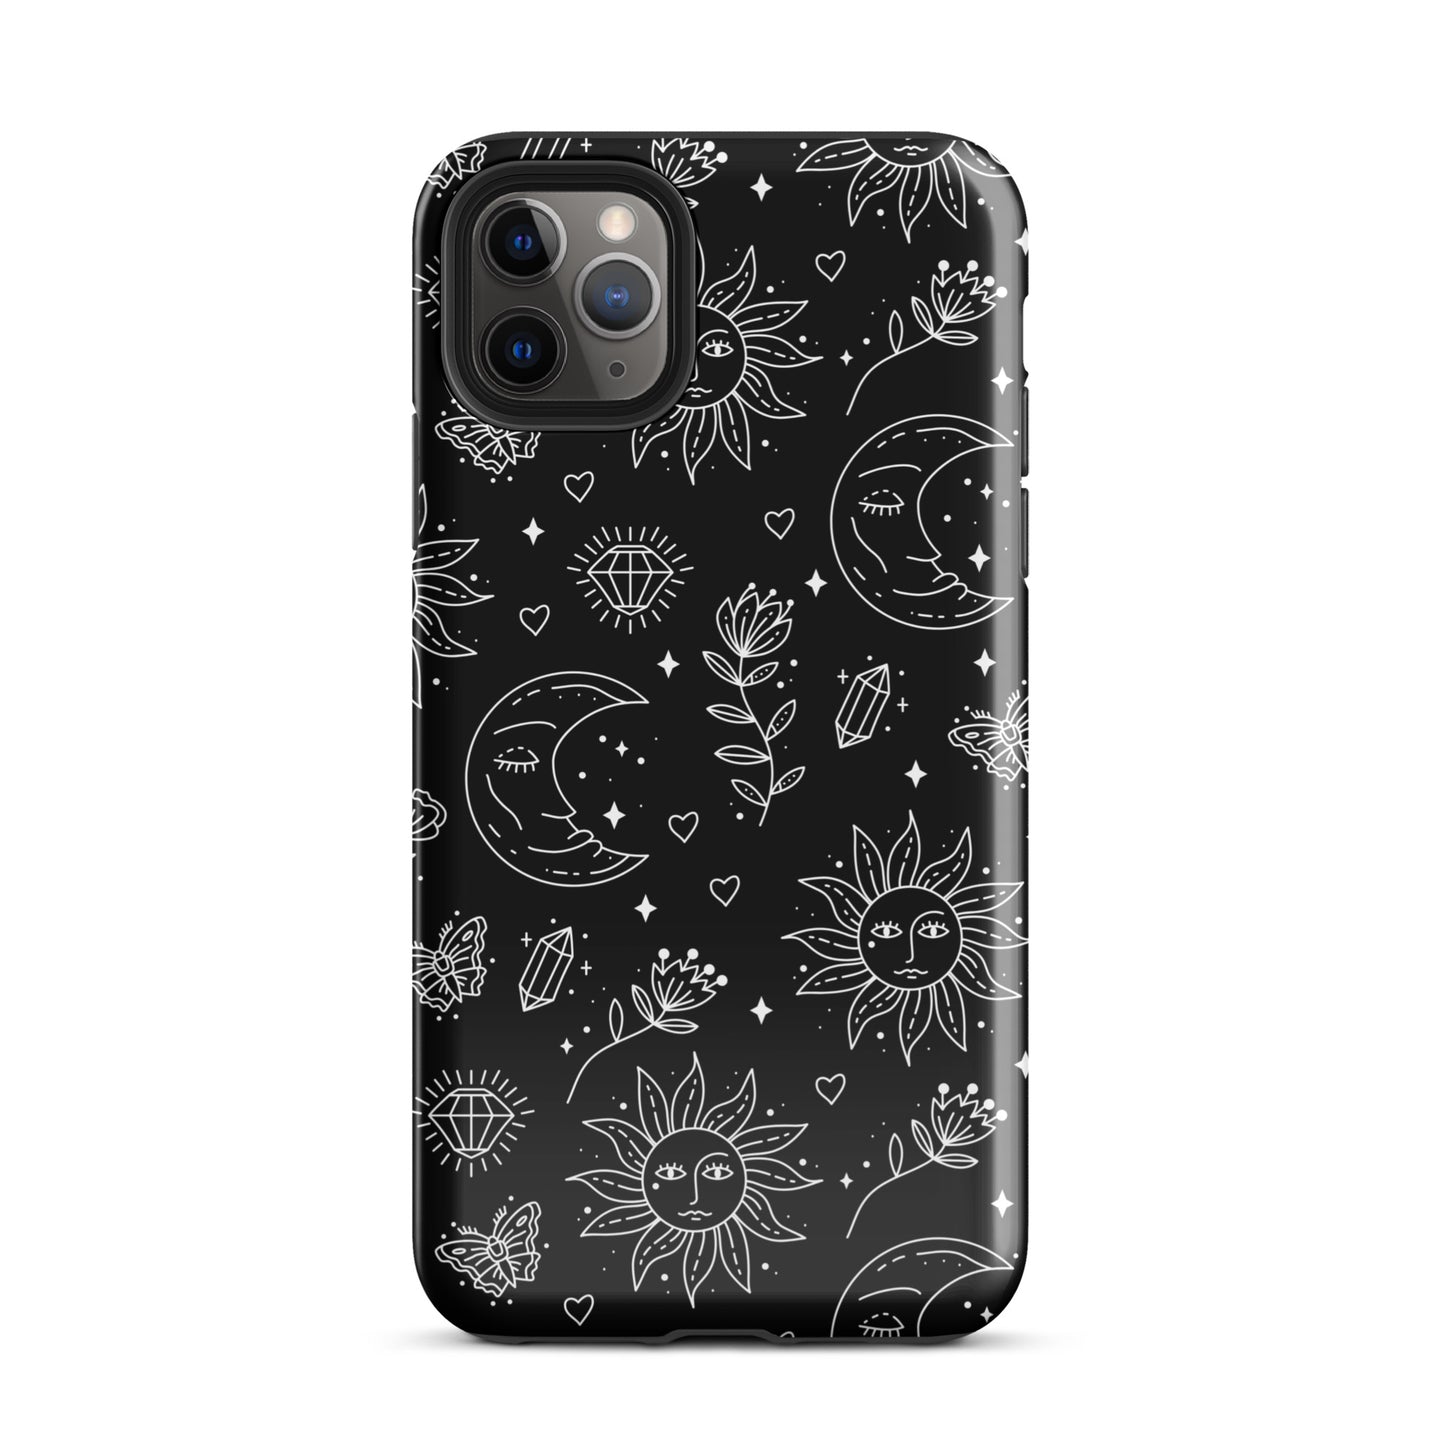 Celestial iPhone Case iPhone 11 Pro Max Glossy